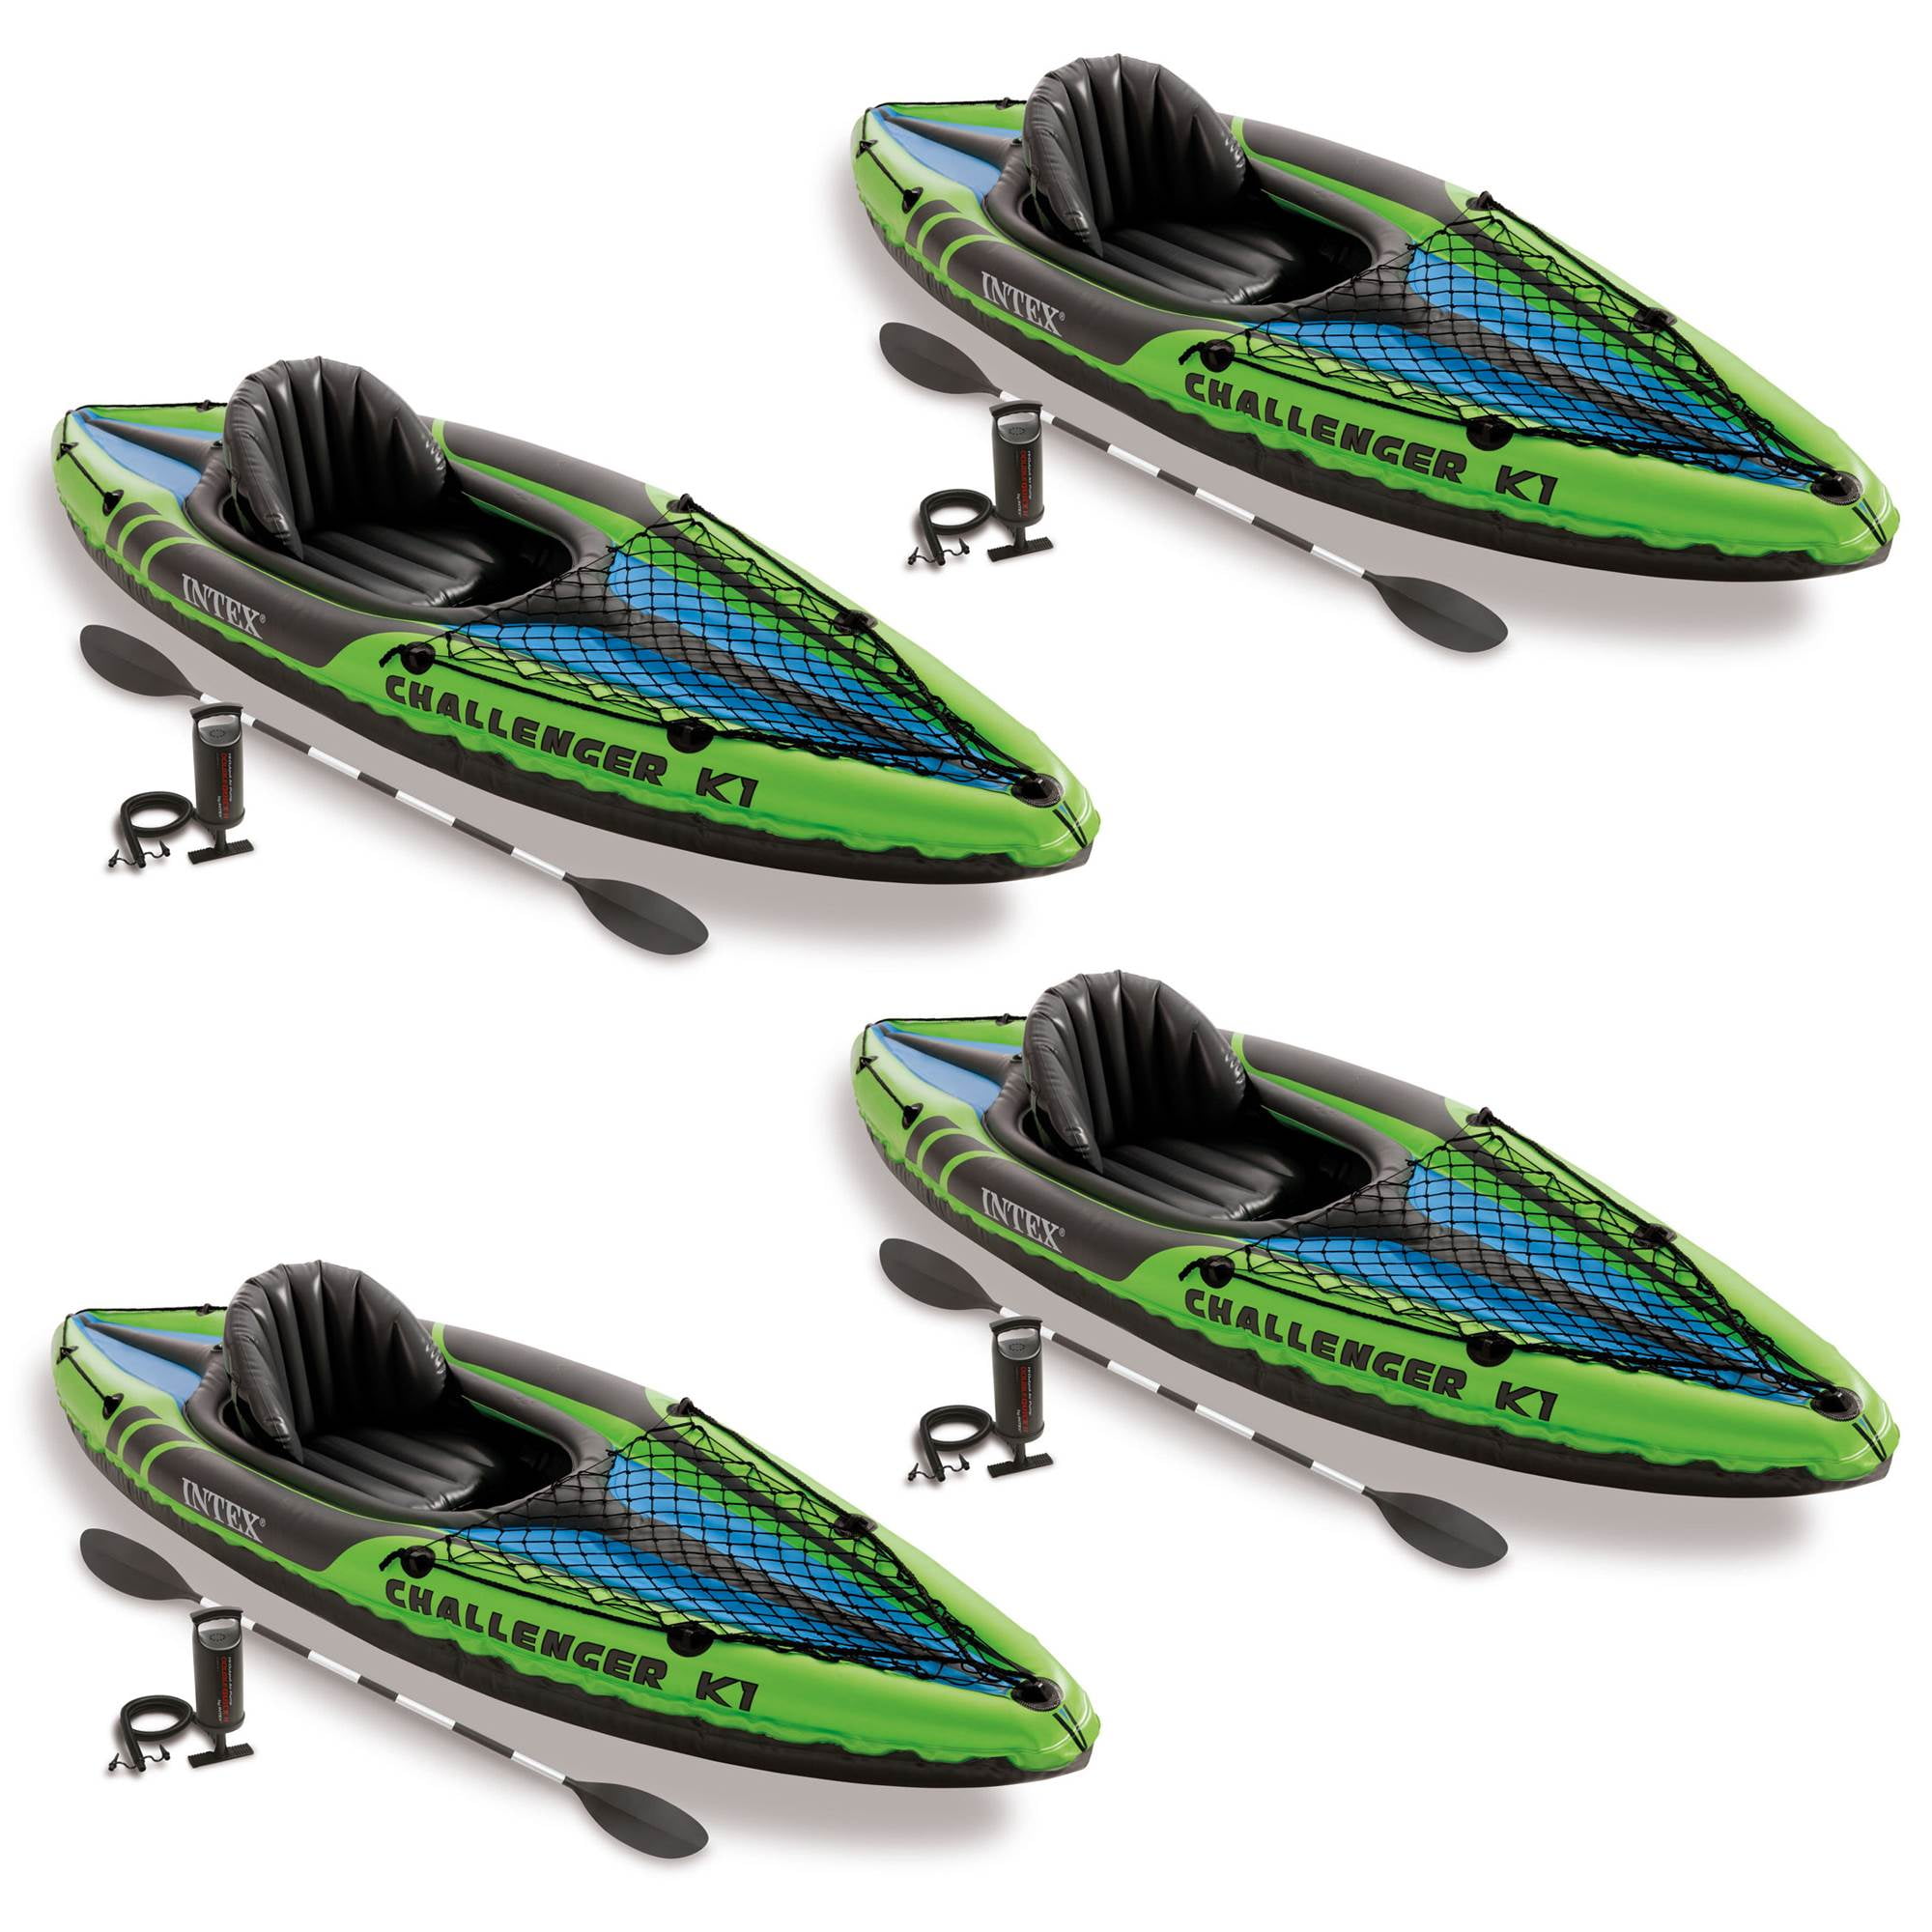 Exciting kayak k1 boat For Thrill And Adventure 